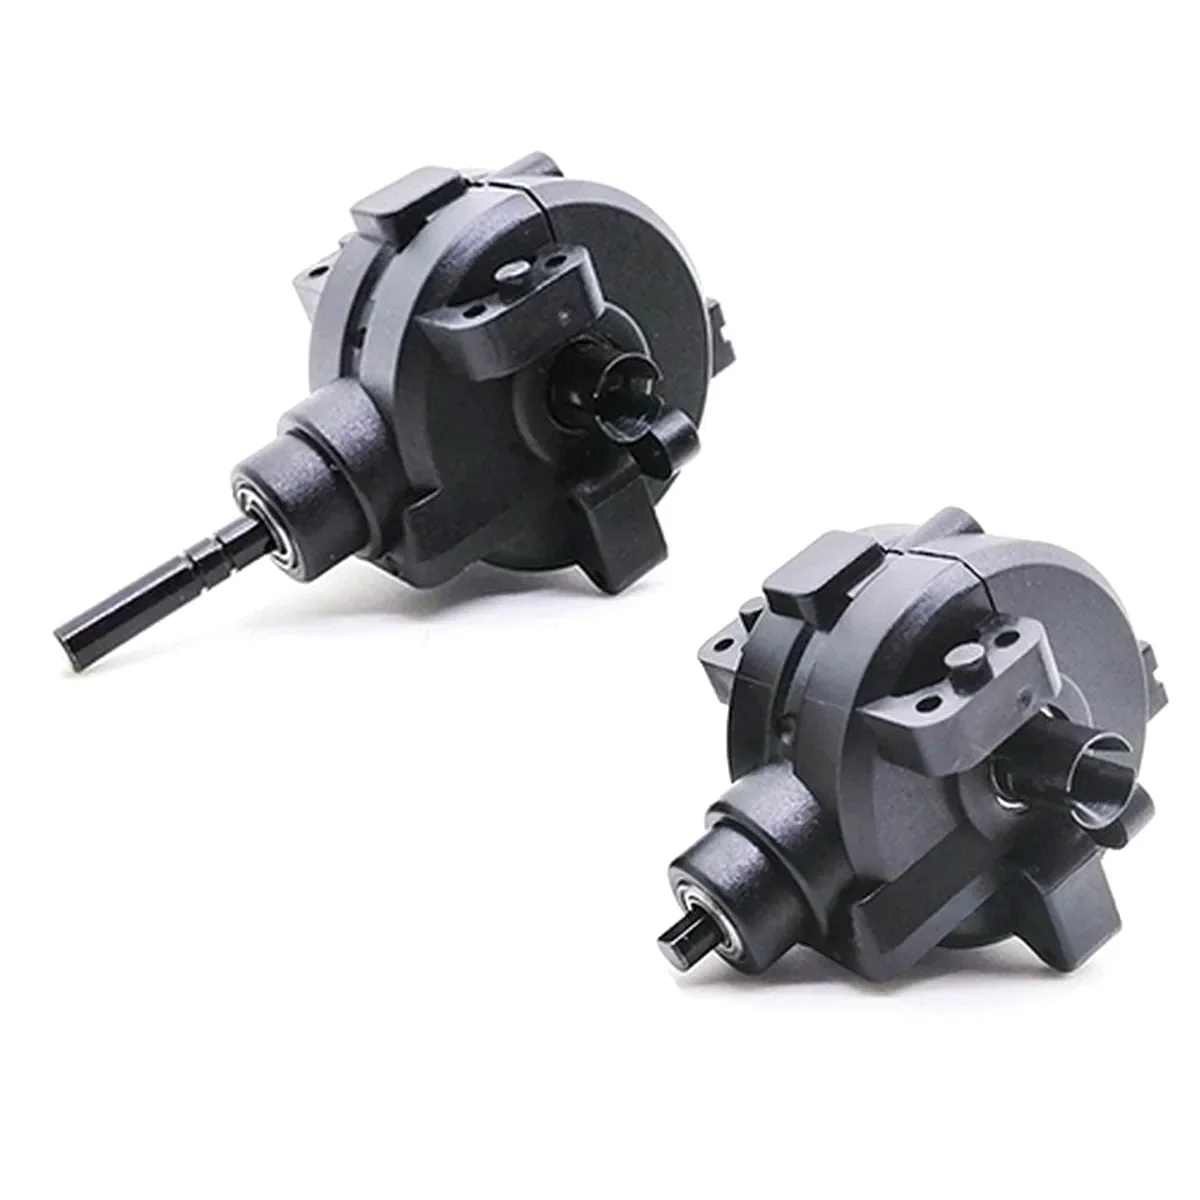 

Front / Rear Gear Box Complete Set Drive&Diff Gears For HSP 1/10 RC Car Parts 02024 02051 02030 03015 94123 94106 94107 94108